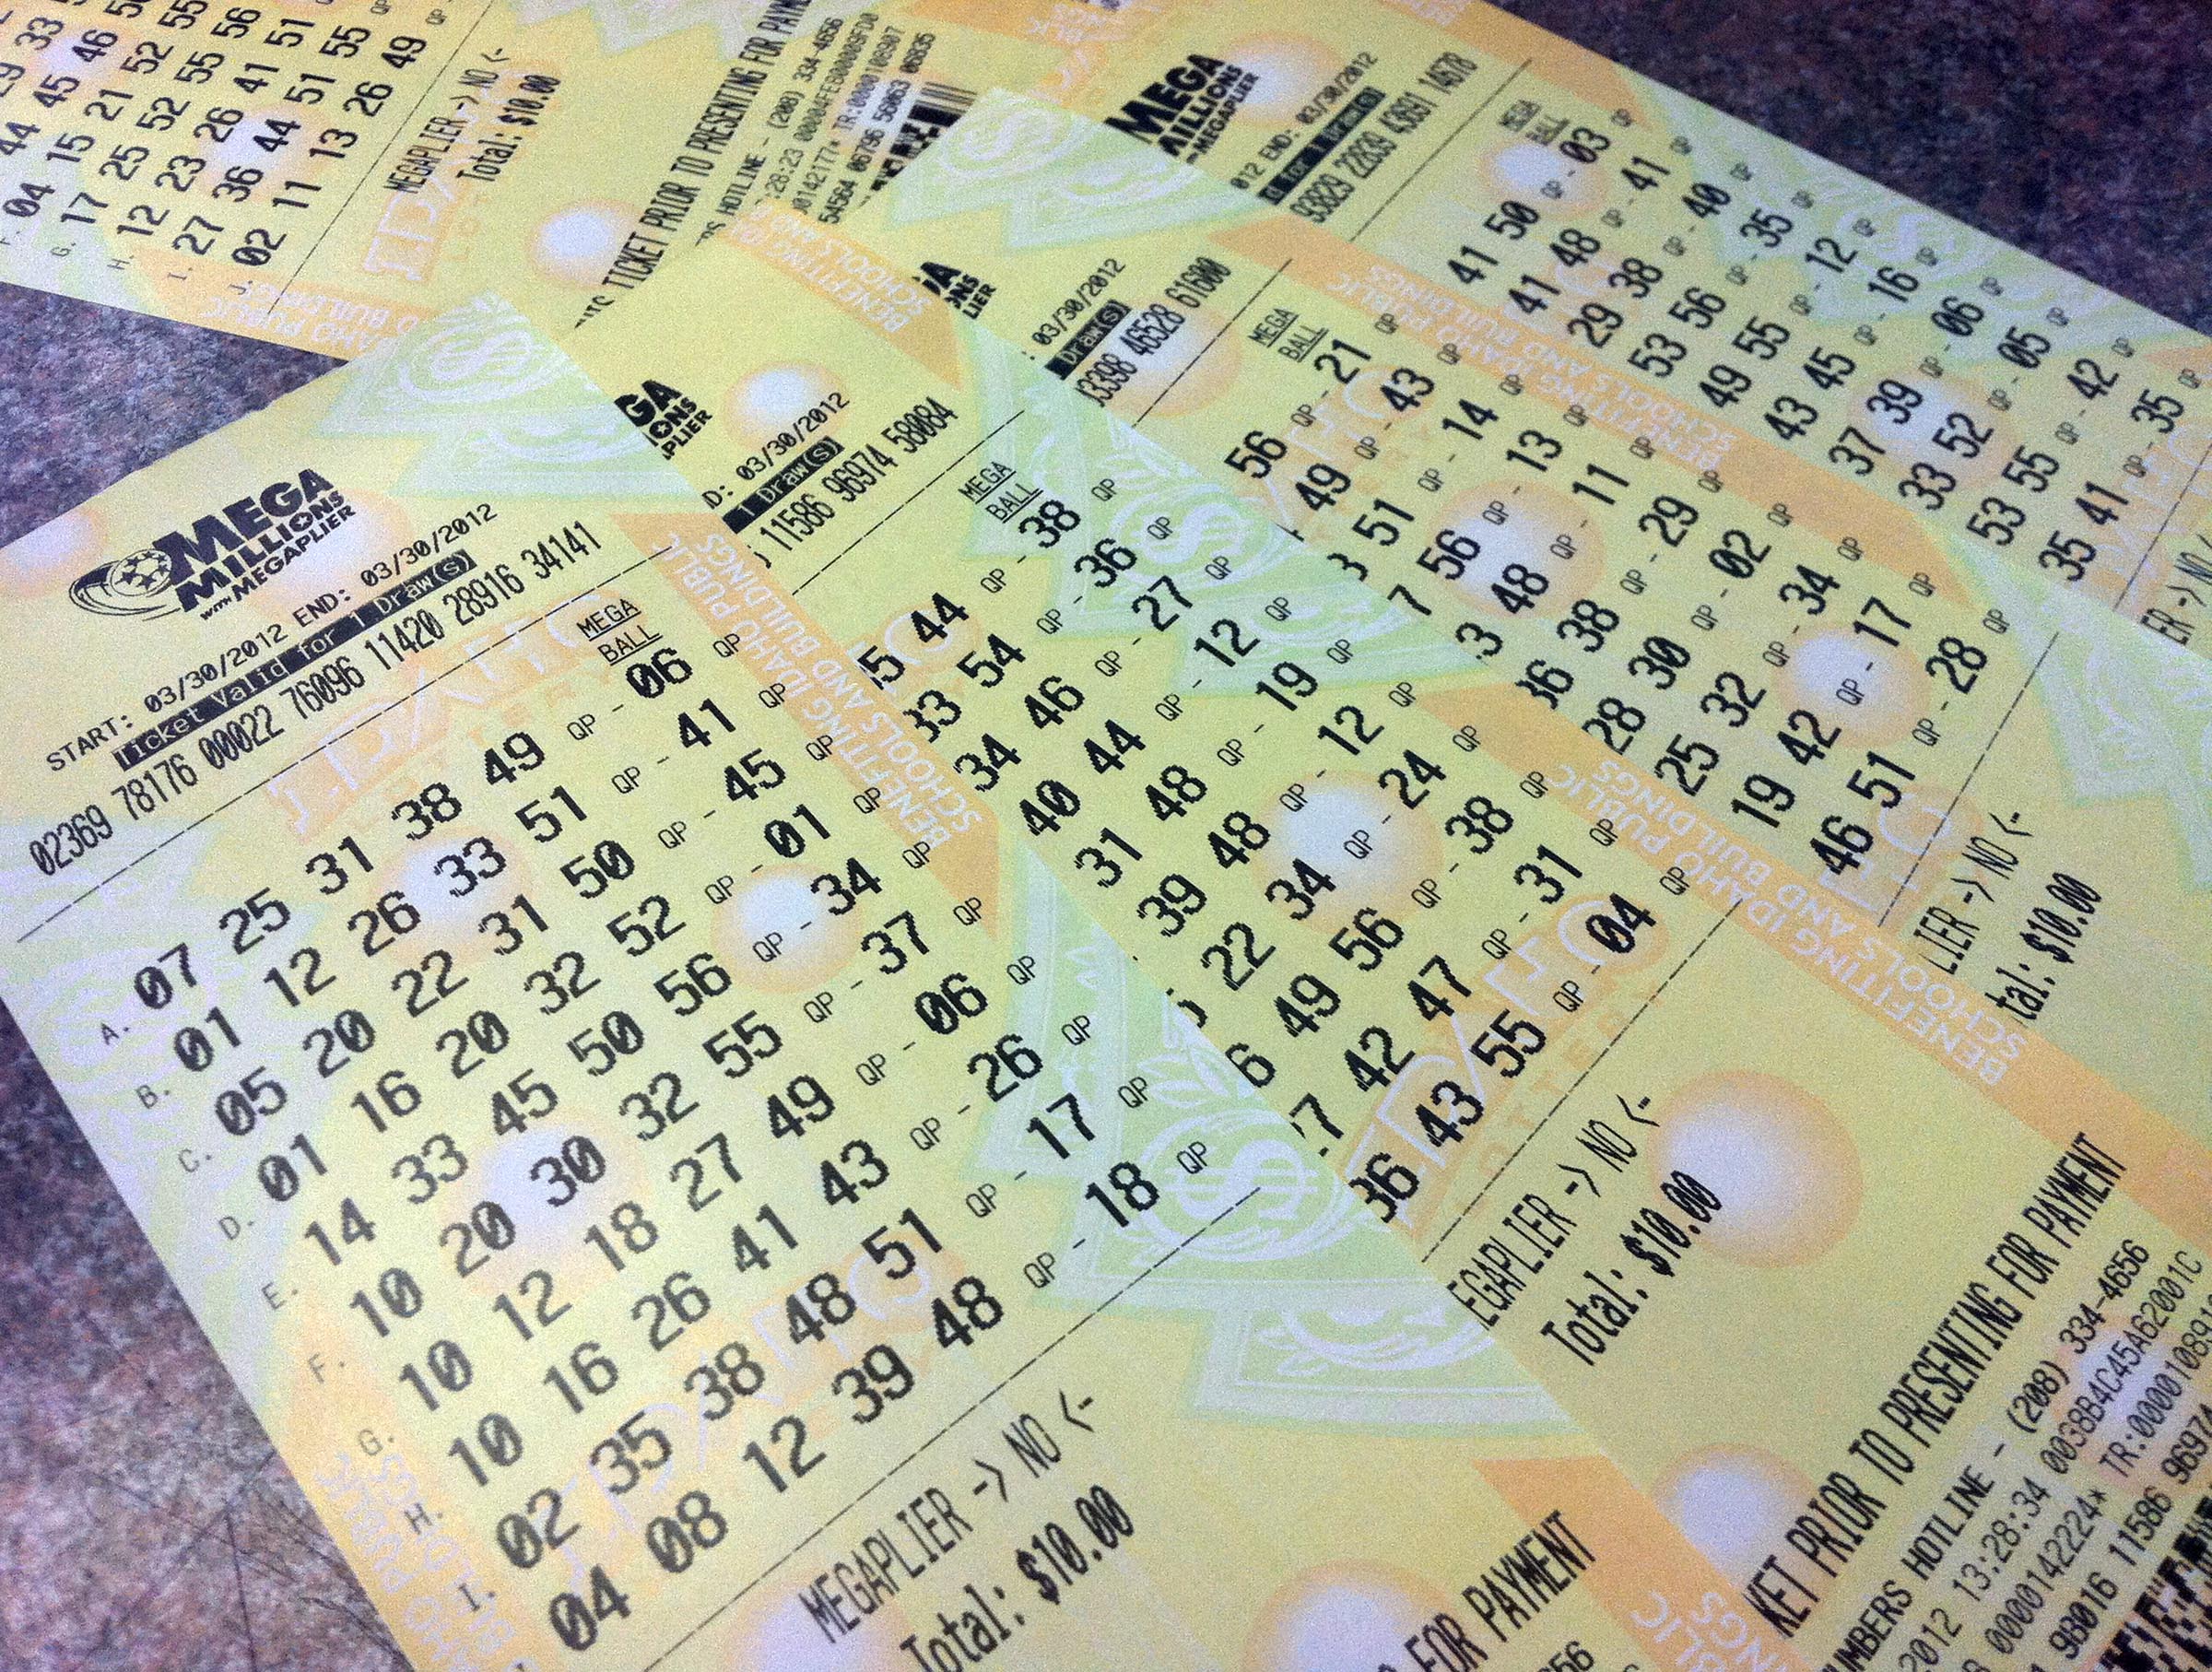 Florida lottery winners' money taken by the state, ITeam helps get it